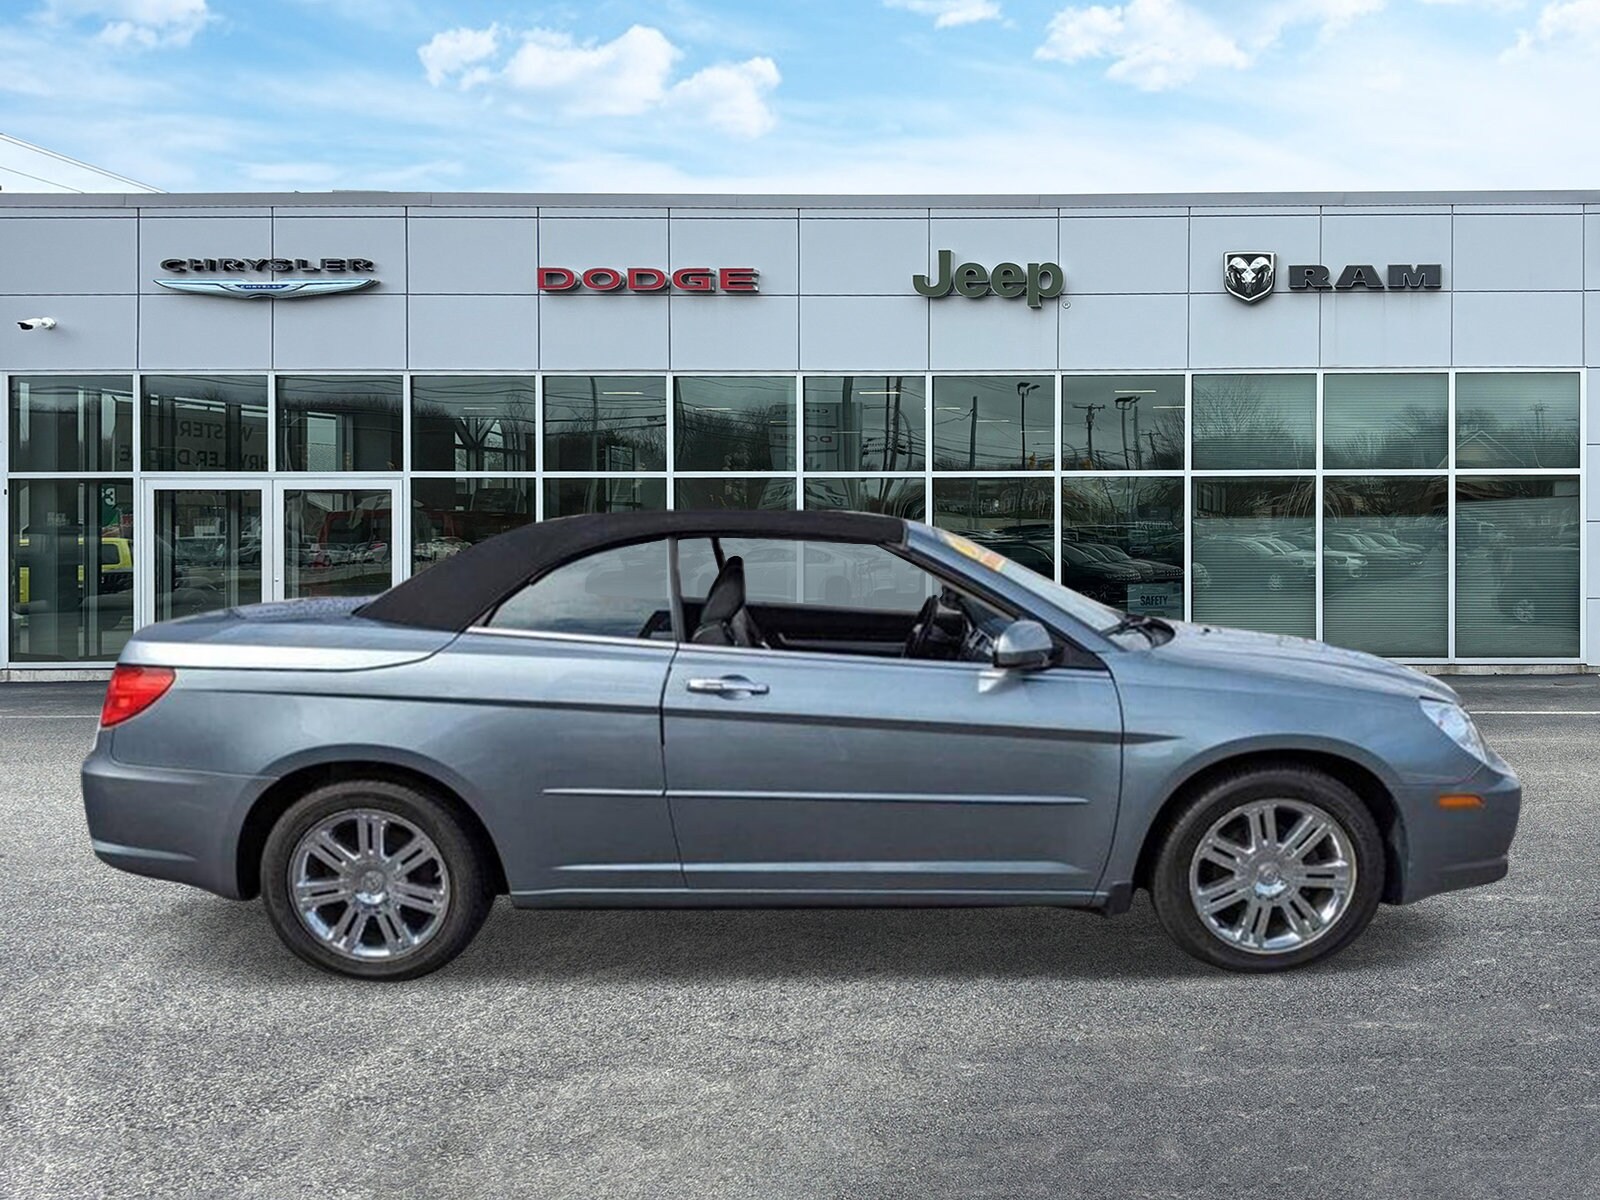 Used 2009 Chrysler Sebring Limited with VIN 1C3LC65V49N543304 for sale in Westerly, RI